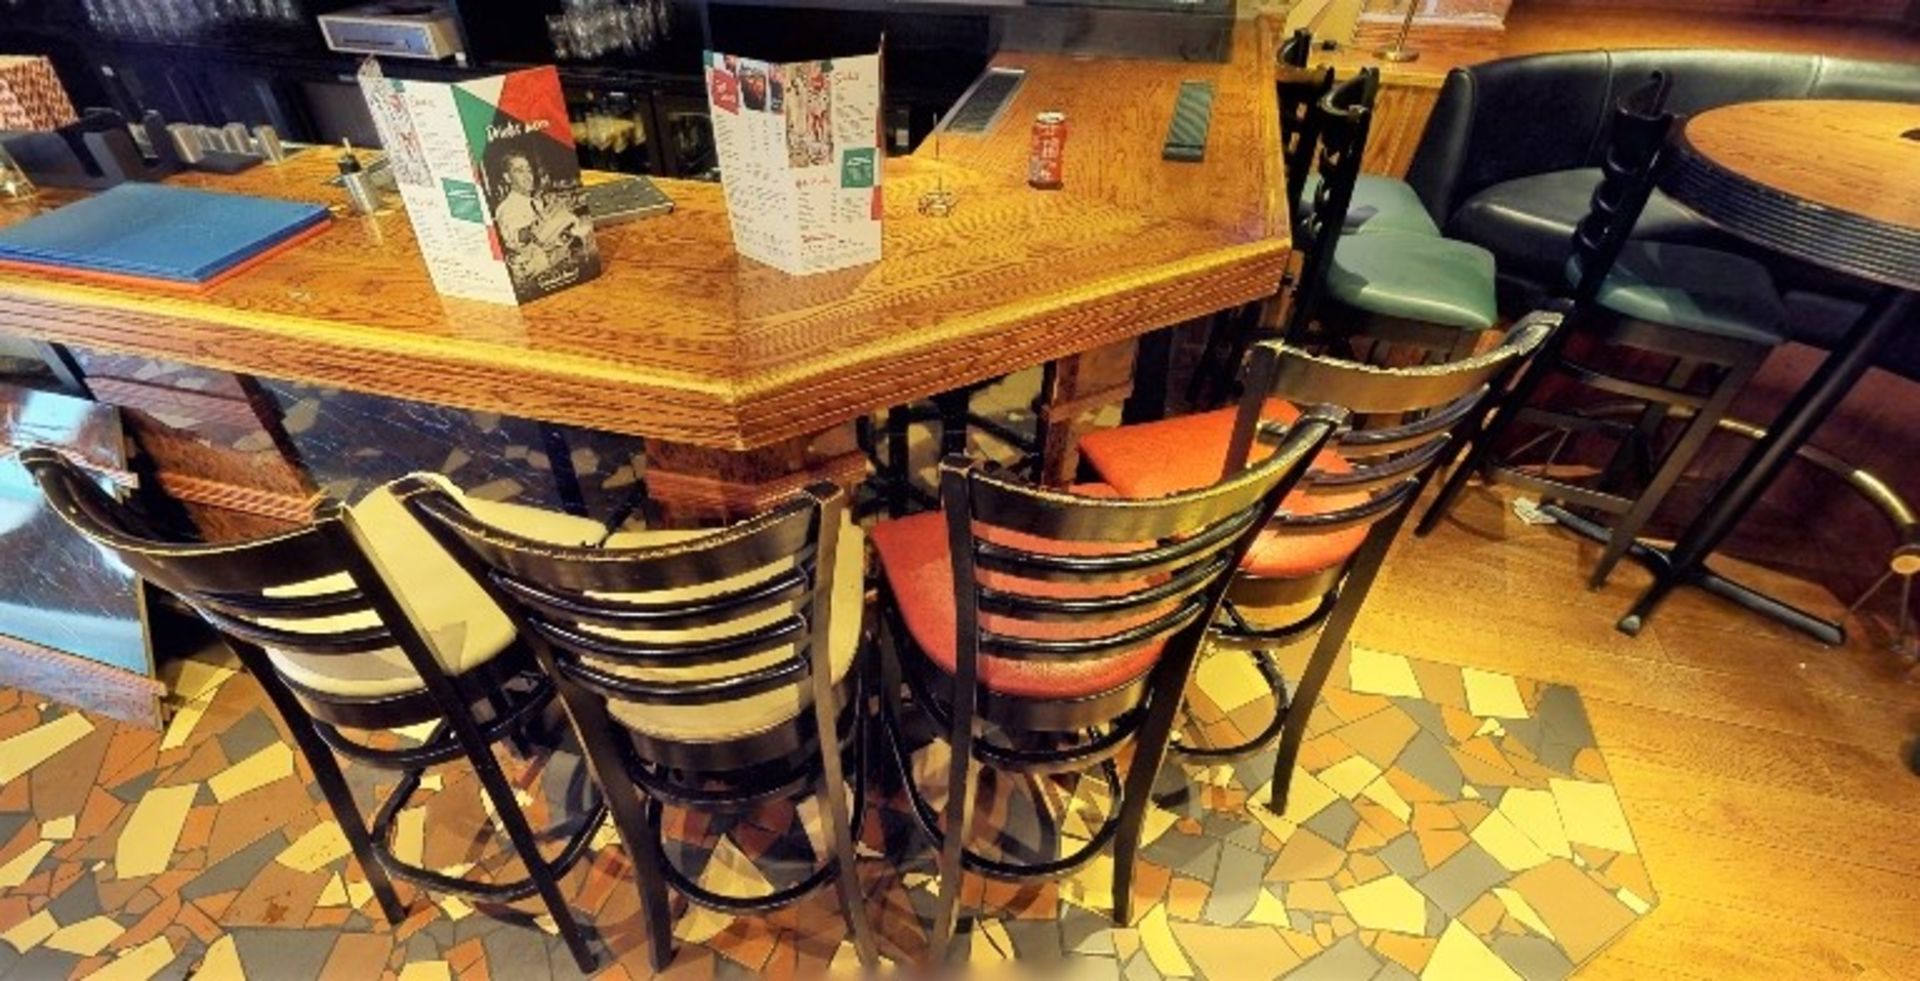 6 x Restaurant Bar Stools - Black Finish With Various Coloured Seat Pads - Image 4 of 5